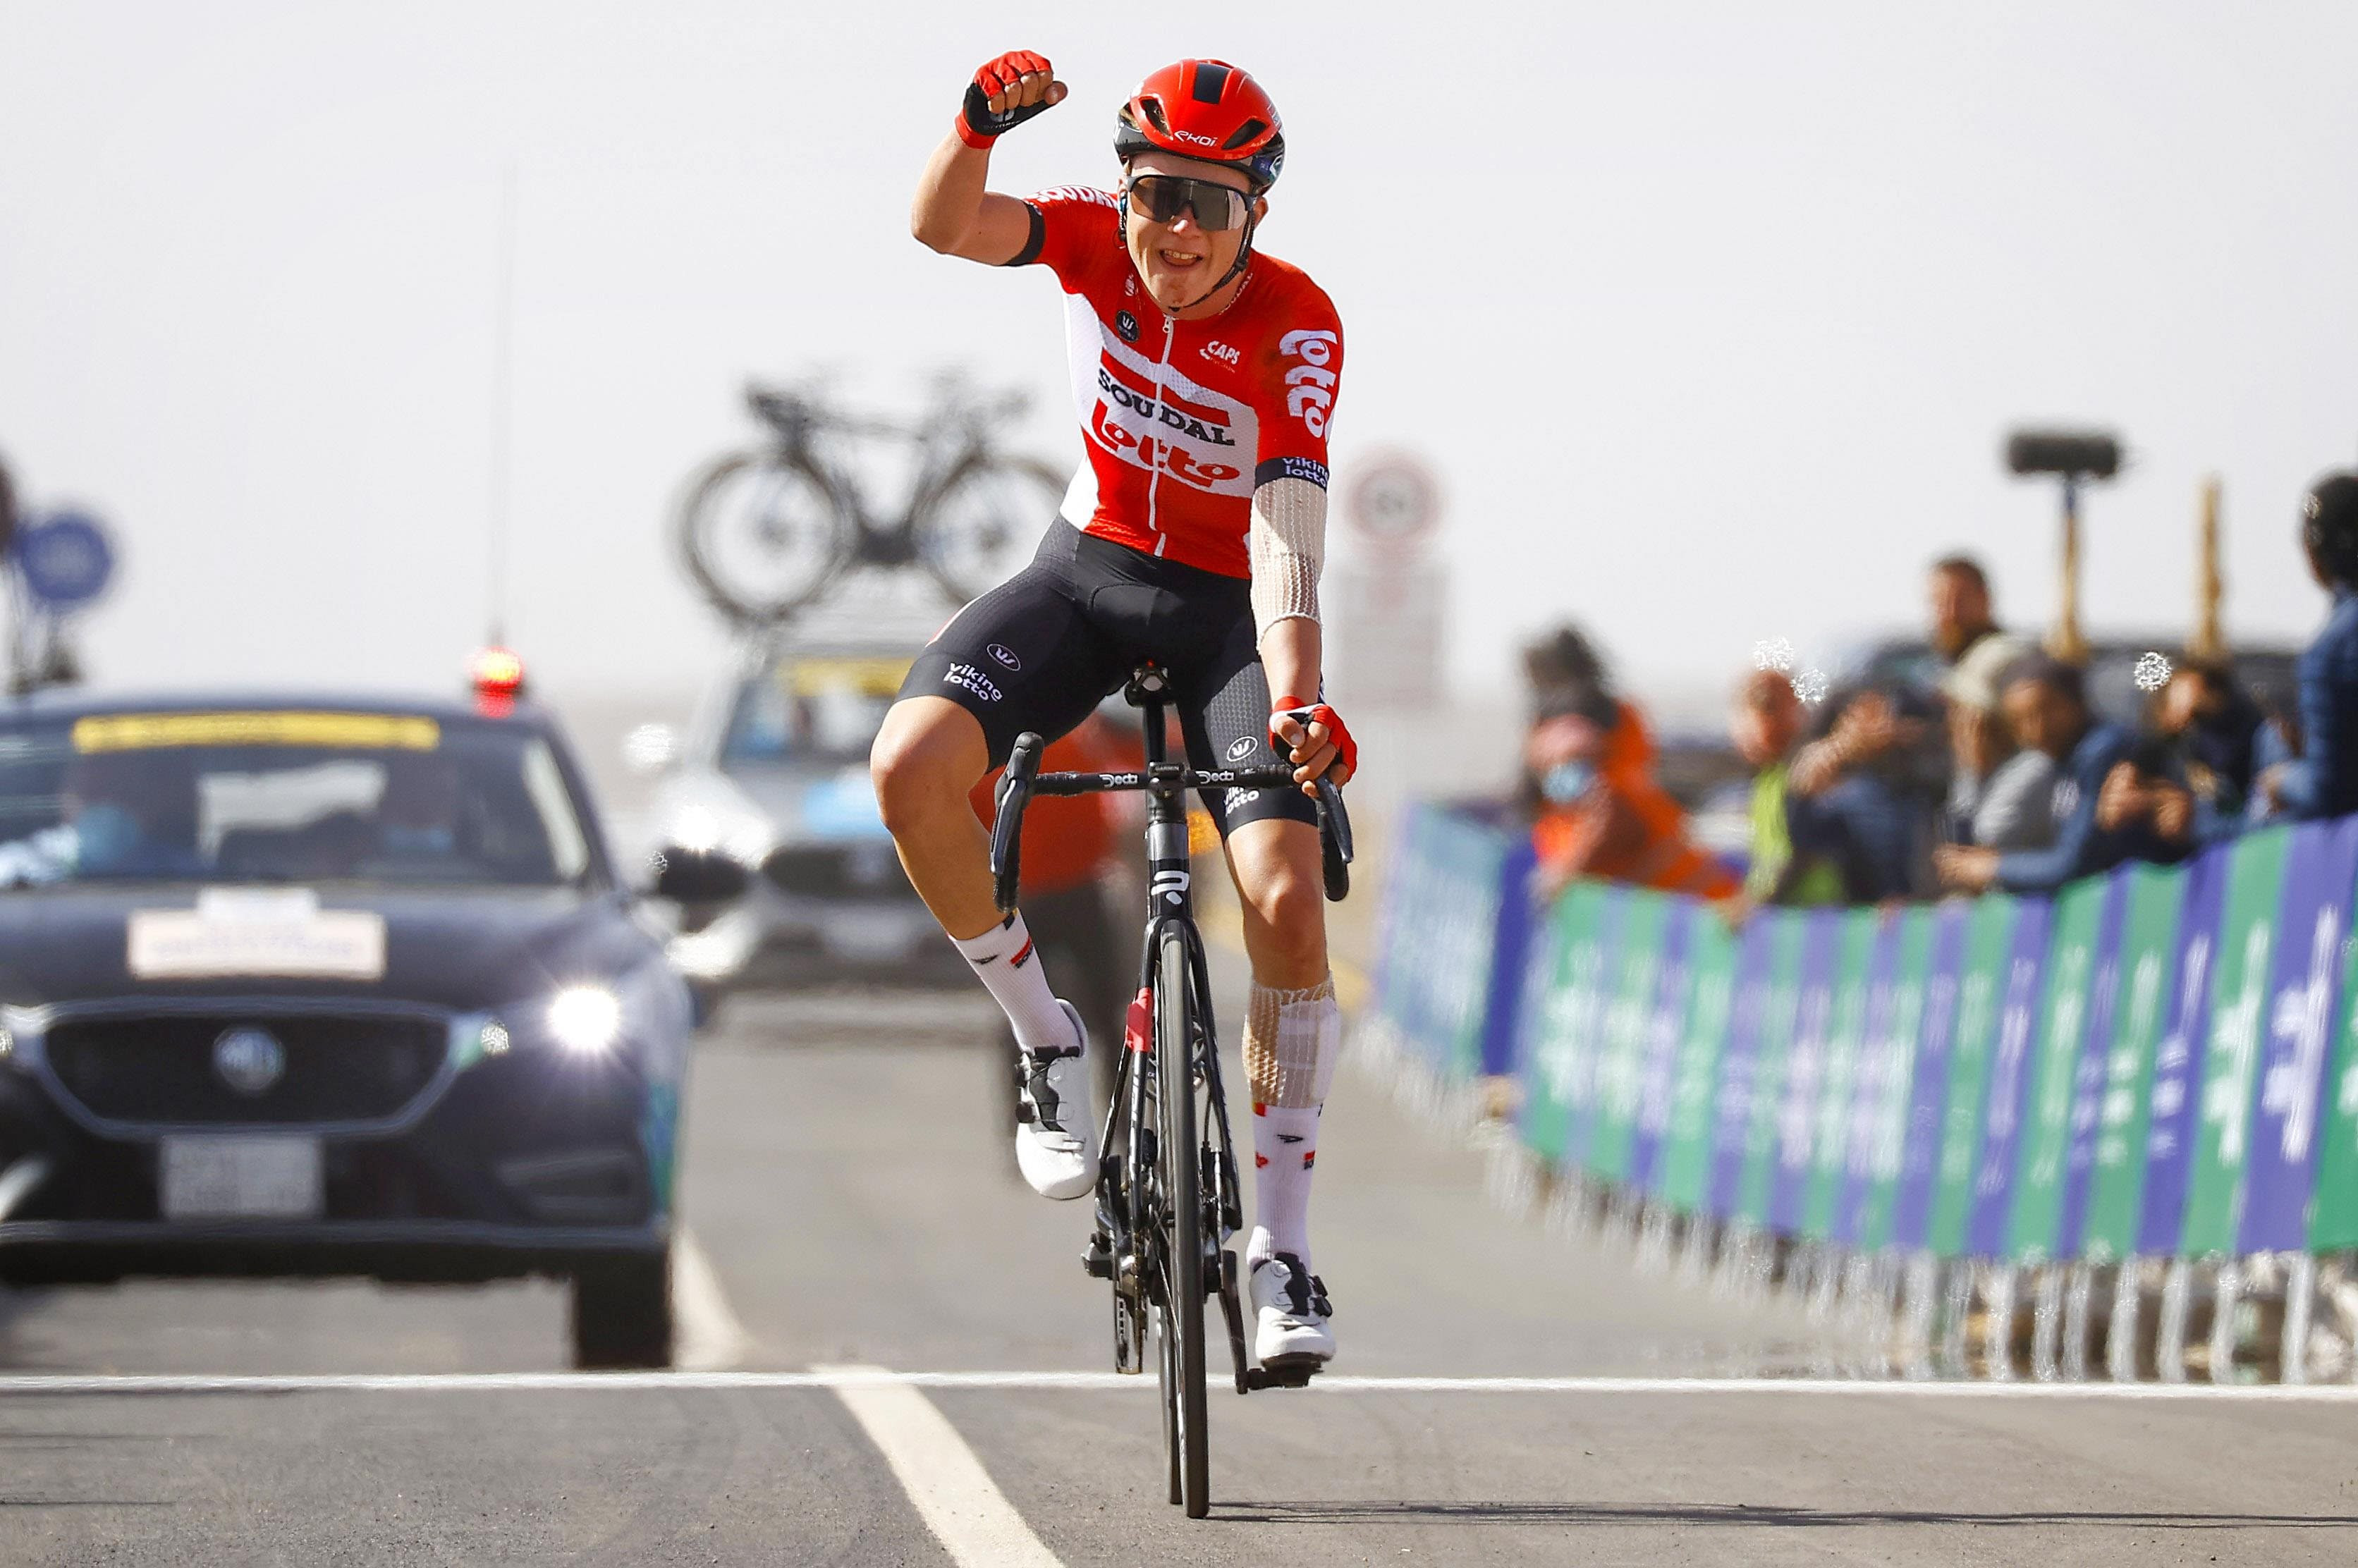 Maxime Van Gils wins and takes theLeader jersey on the Saudi Tour